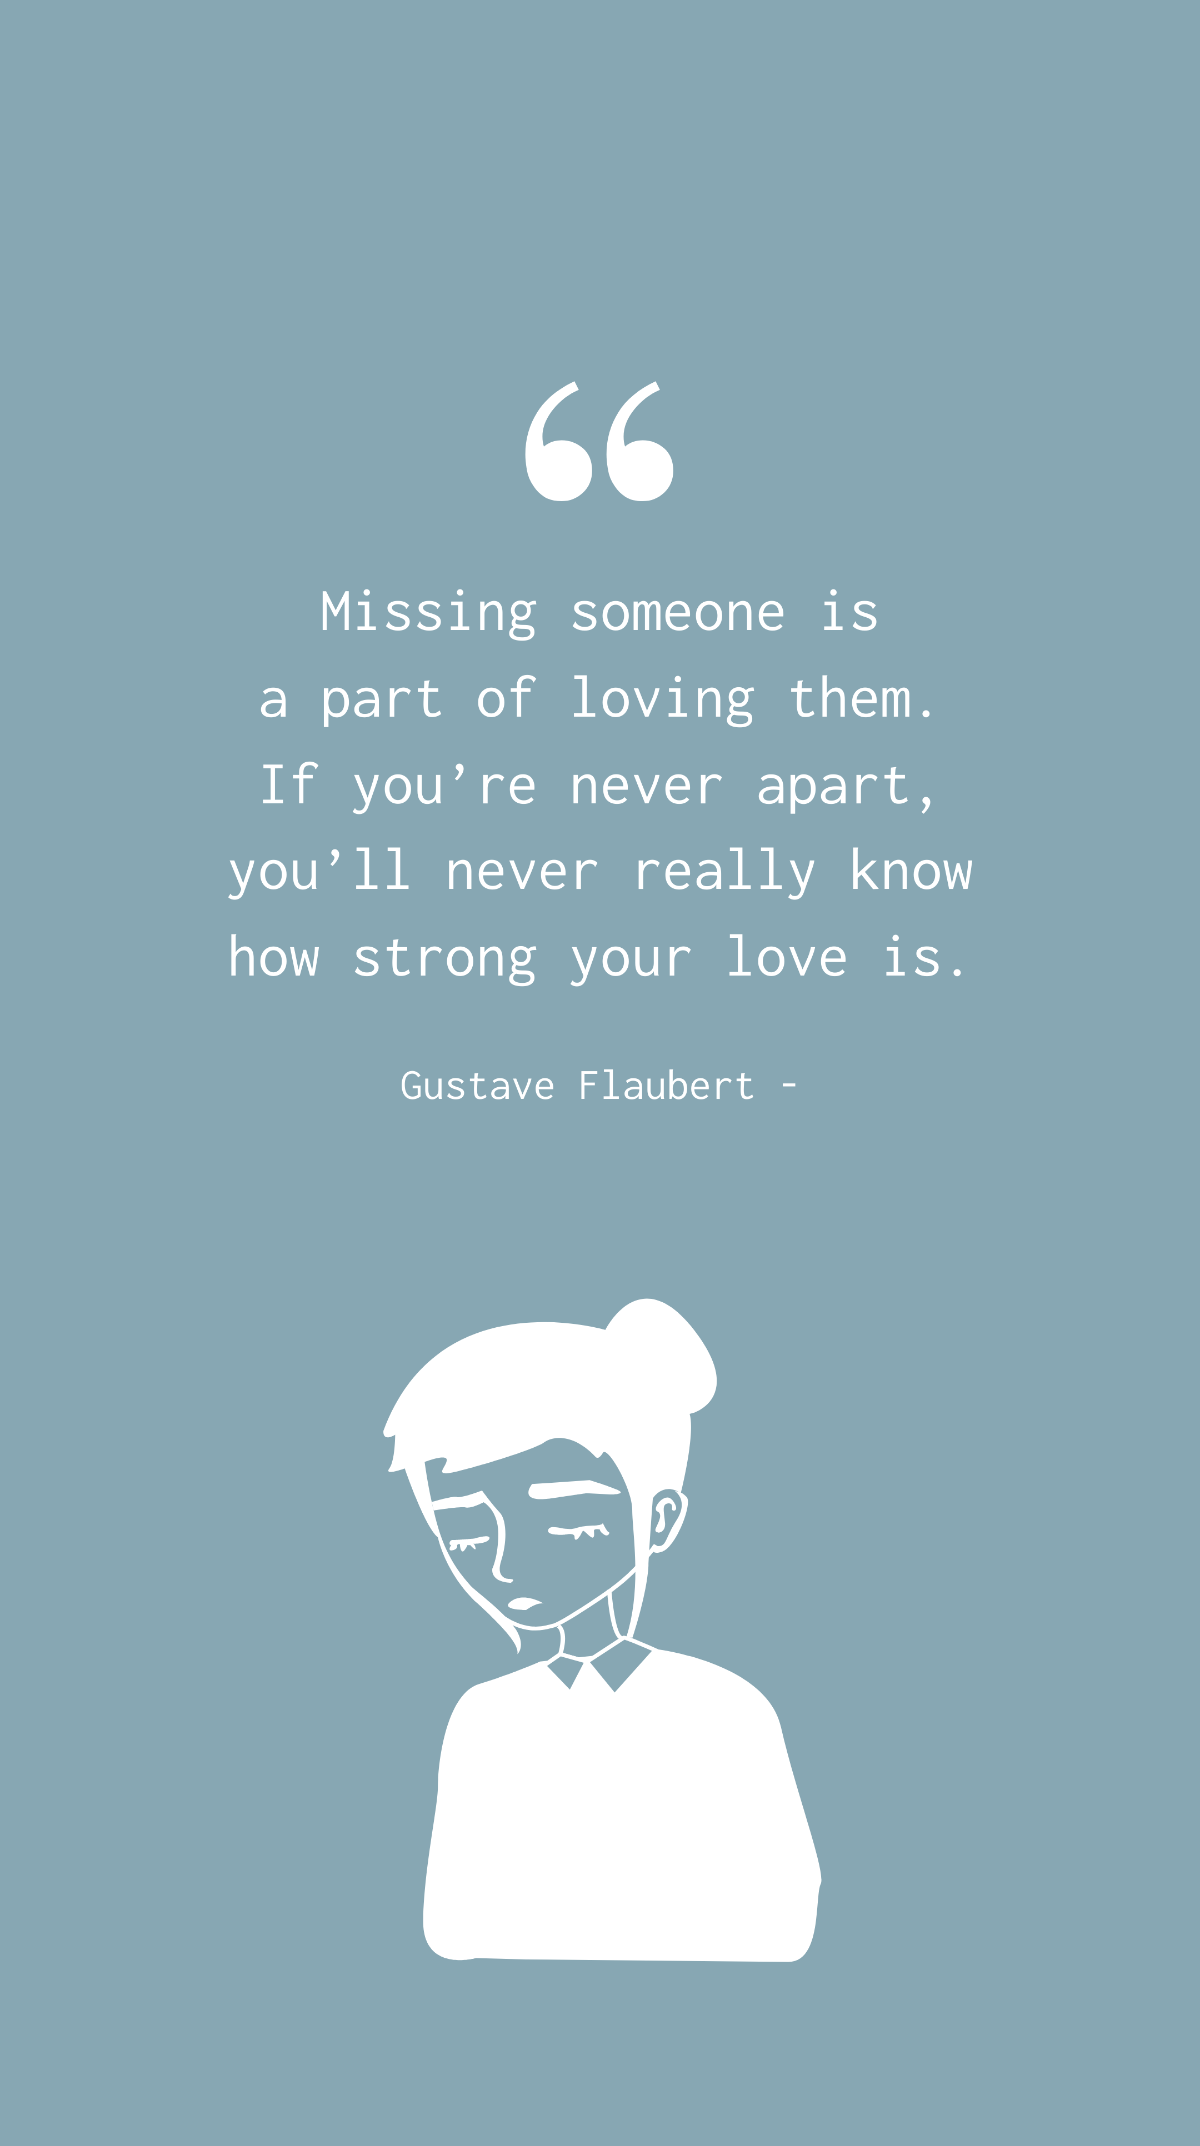 Gustave Flaubert - Missing someone is a part of loving them. If you’re never apart, you’ll never really know how strong your love is. Template